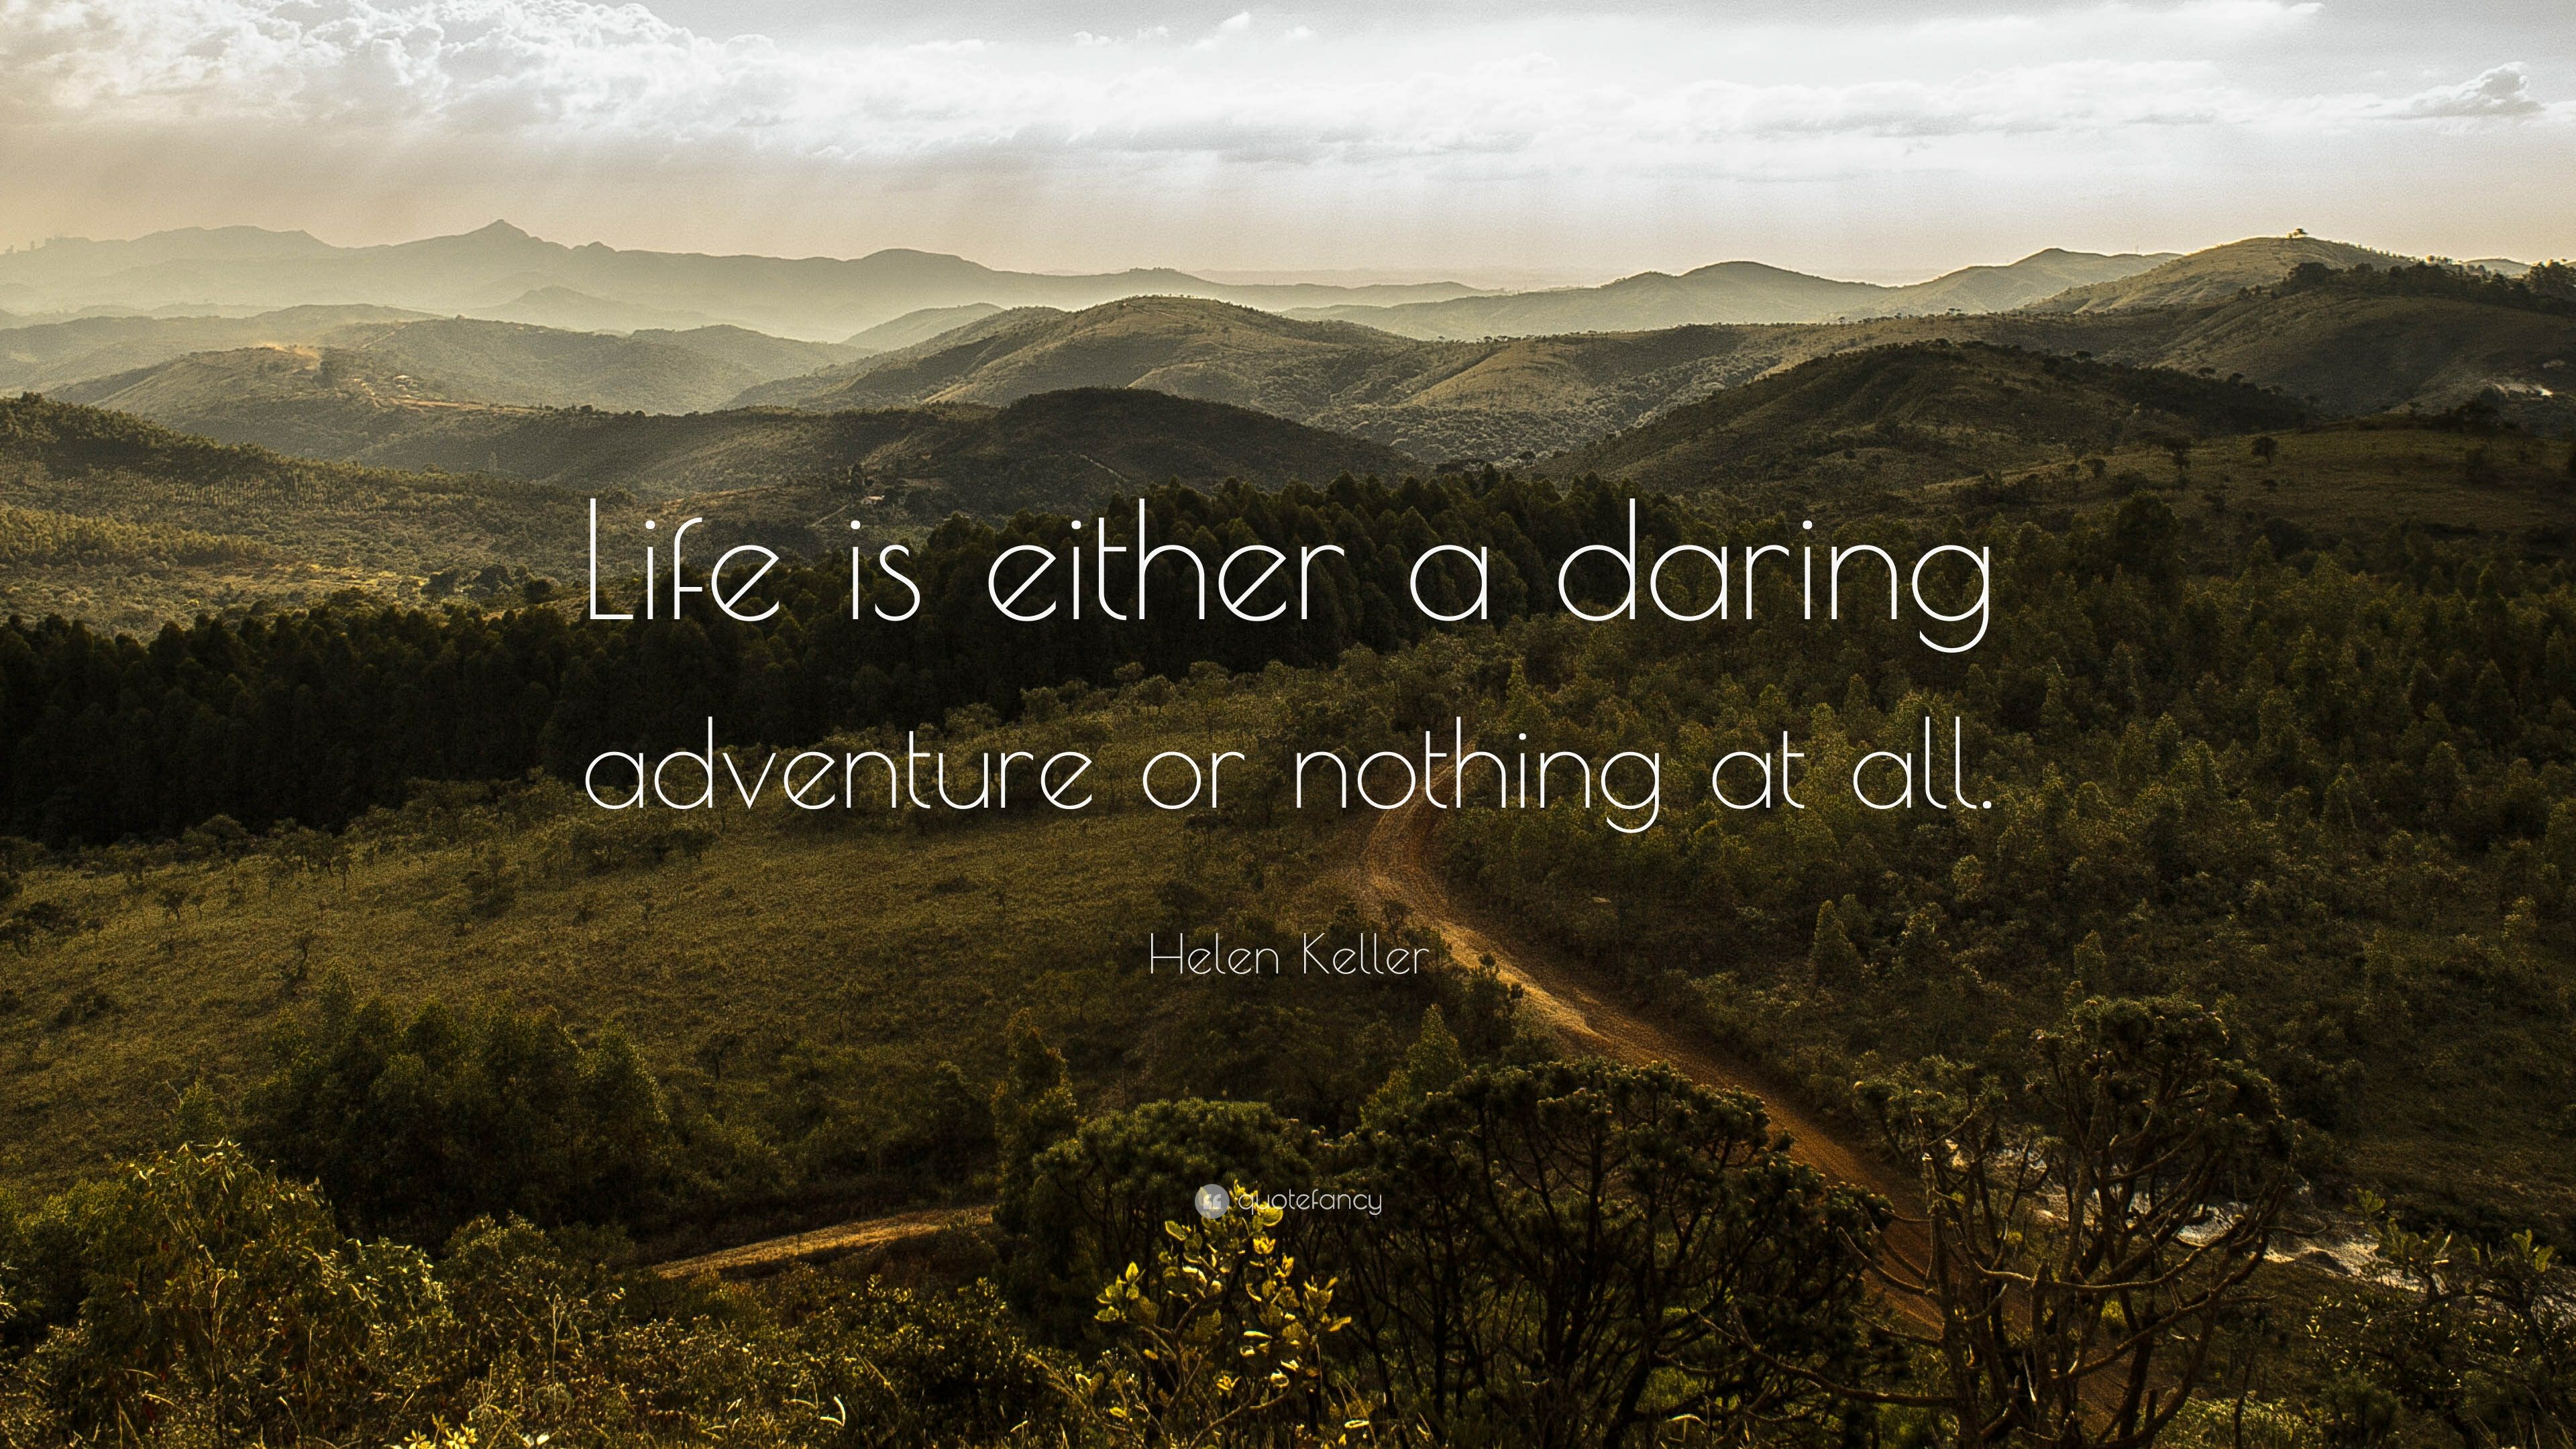 Helen Keller Quote: “Life is either a daring adventure or nothing at